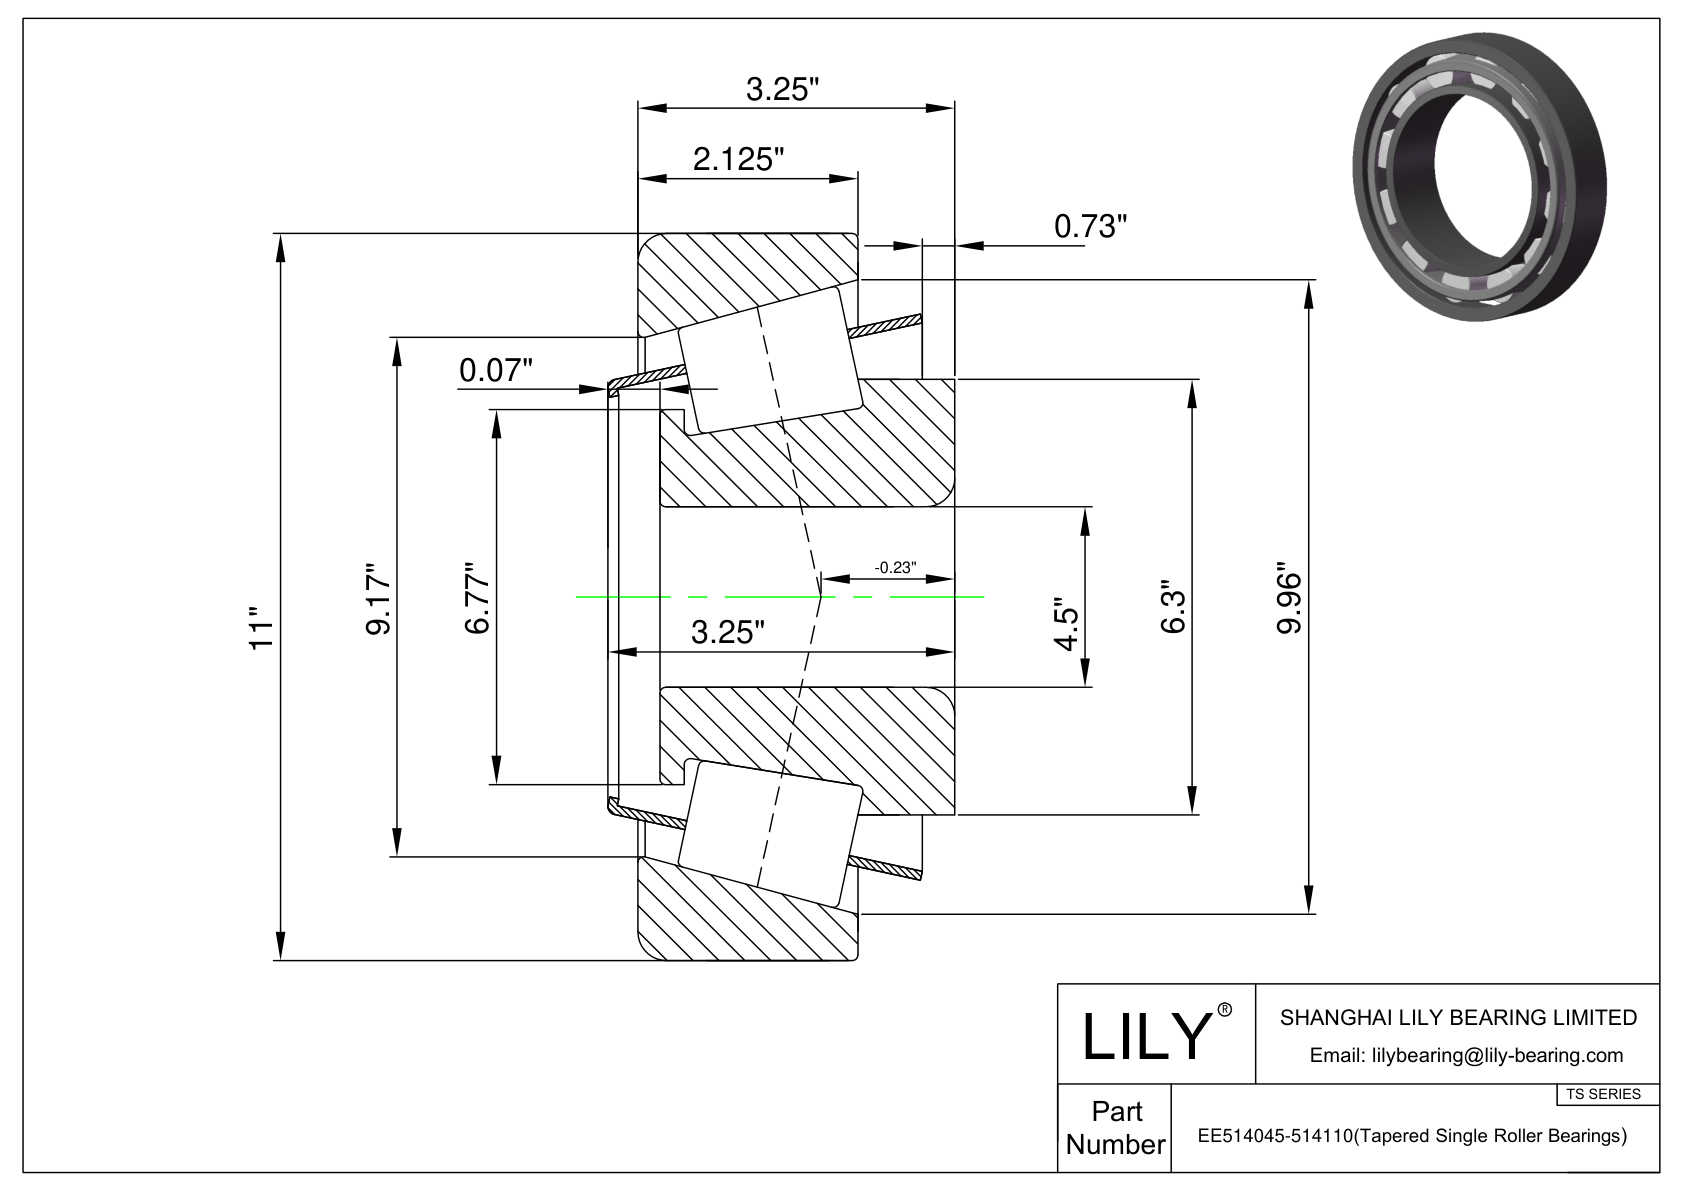 EE514045-514110 TS (Tapered Single Roller Bearings) (Imperial) cad drawing